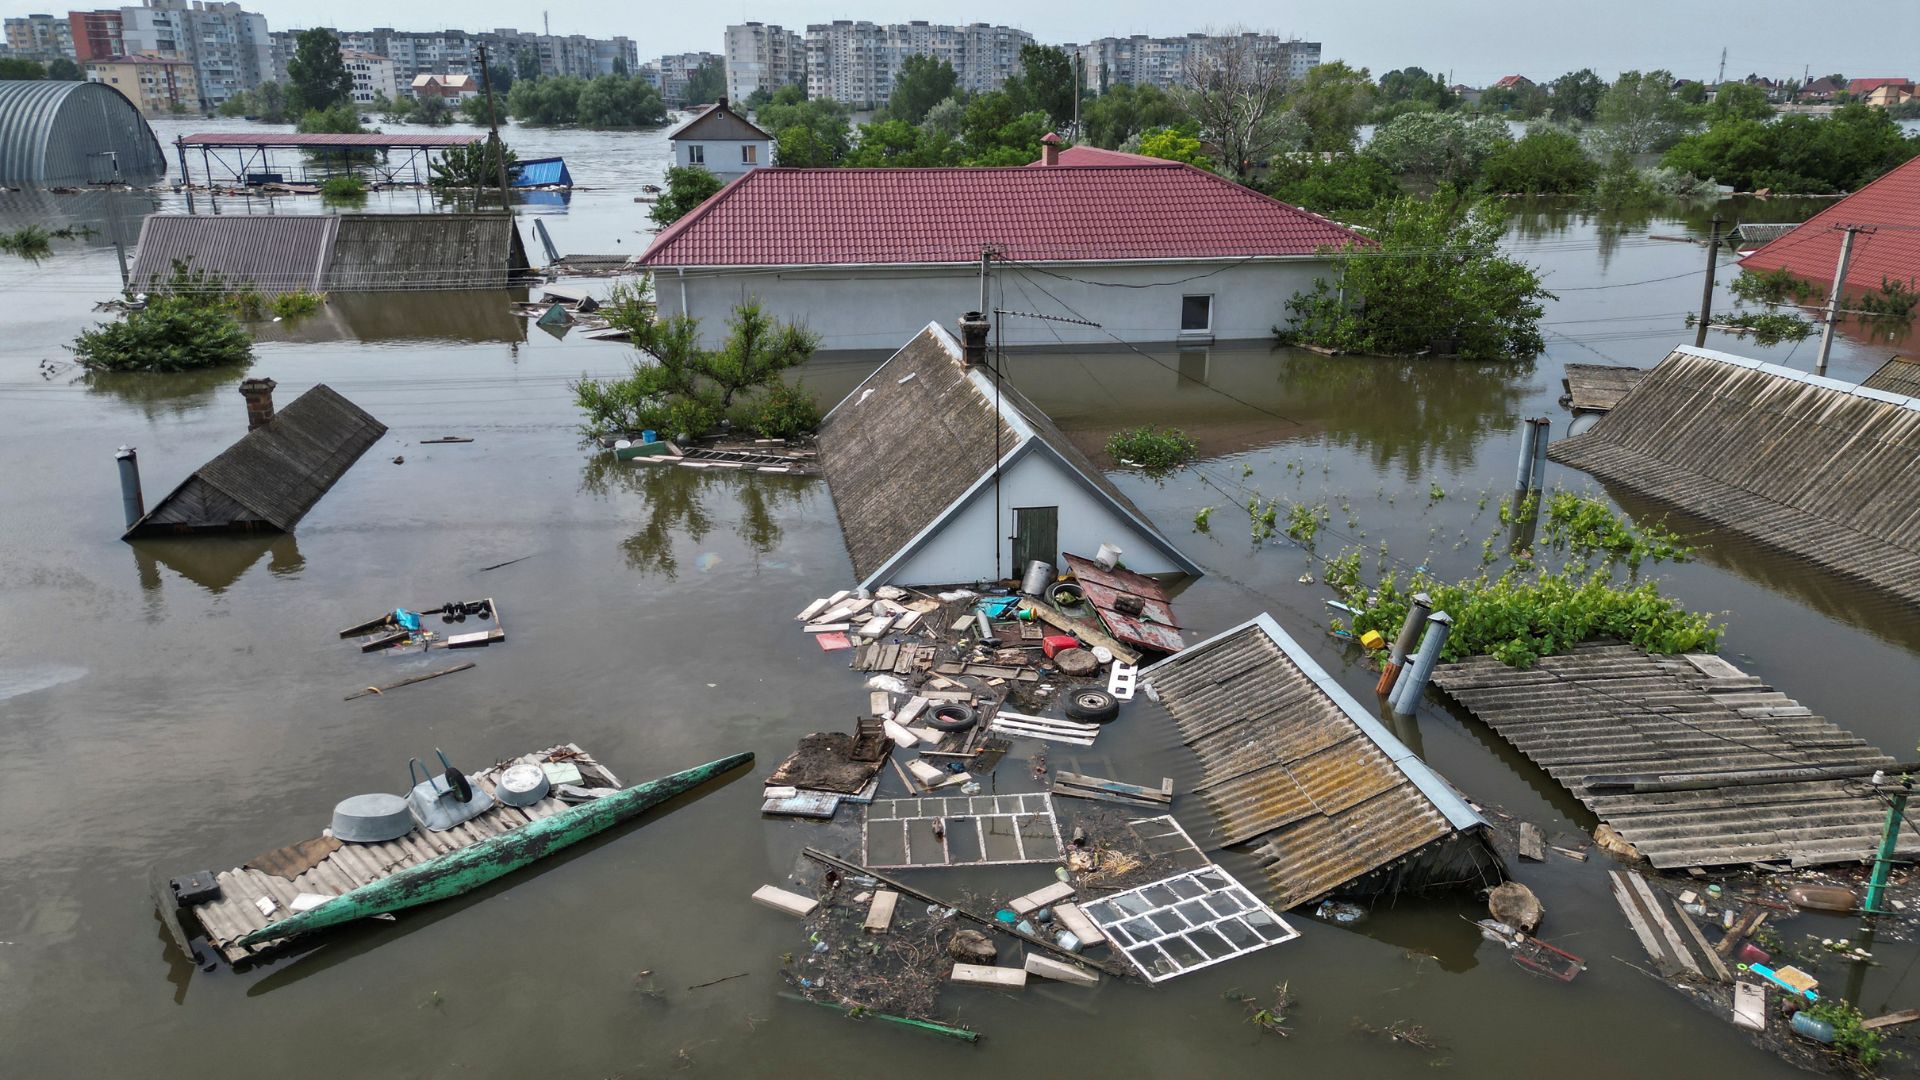 Villages near the dam have been almost entirely submerged by the flood waters./Reuters